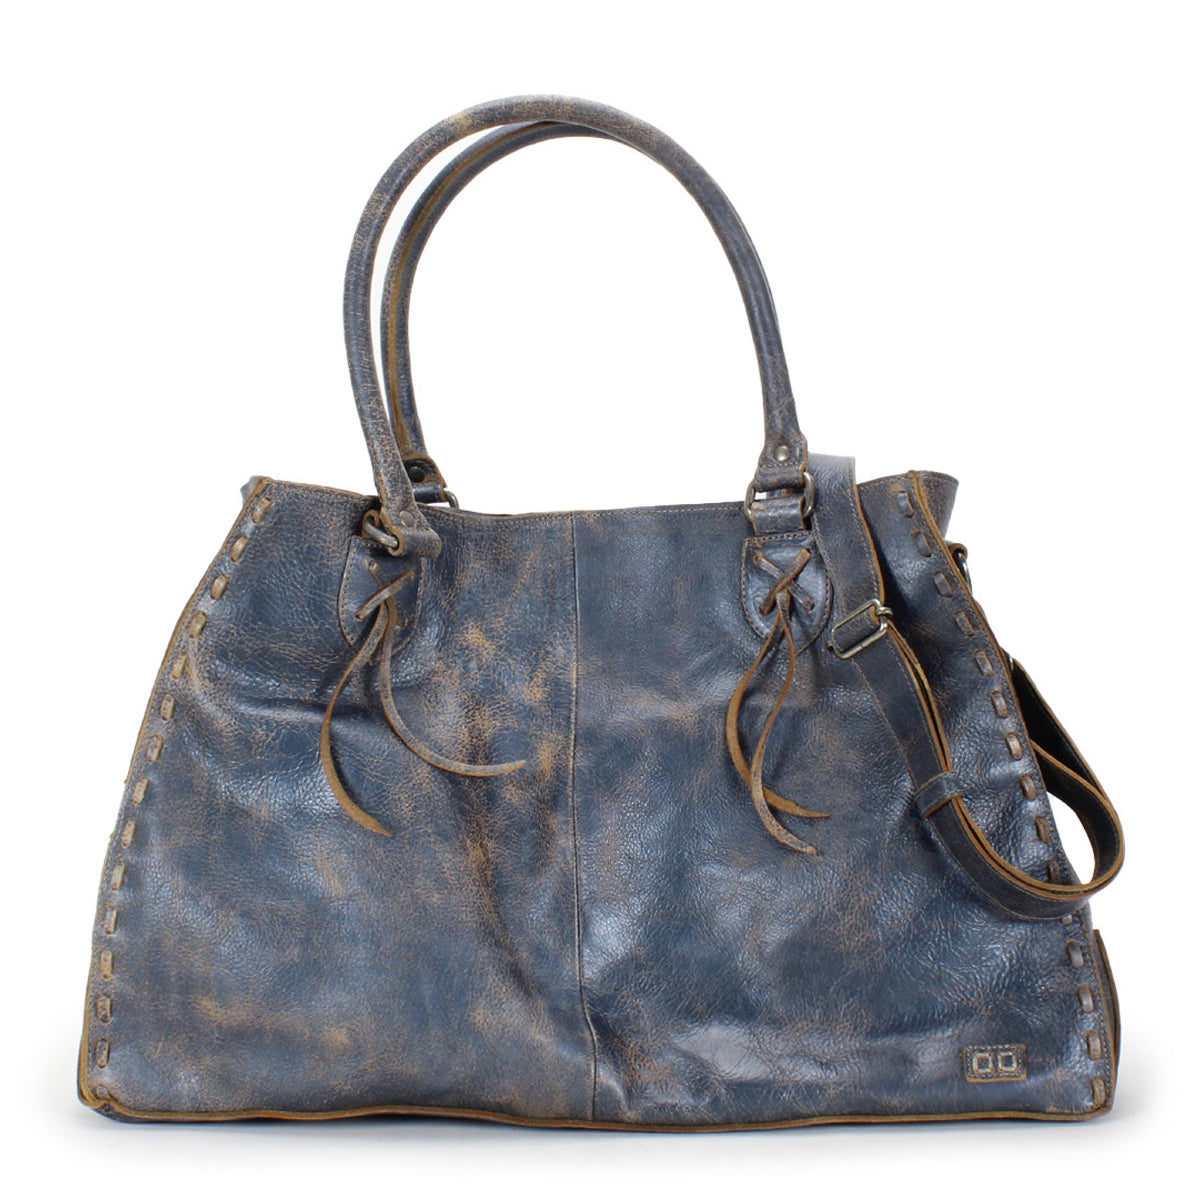 A Rockaway handbag in blue leather with a leather handle made by Bed Stu.